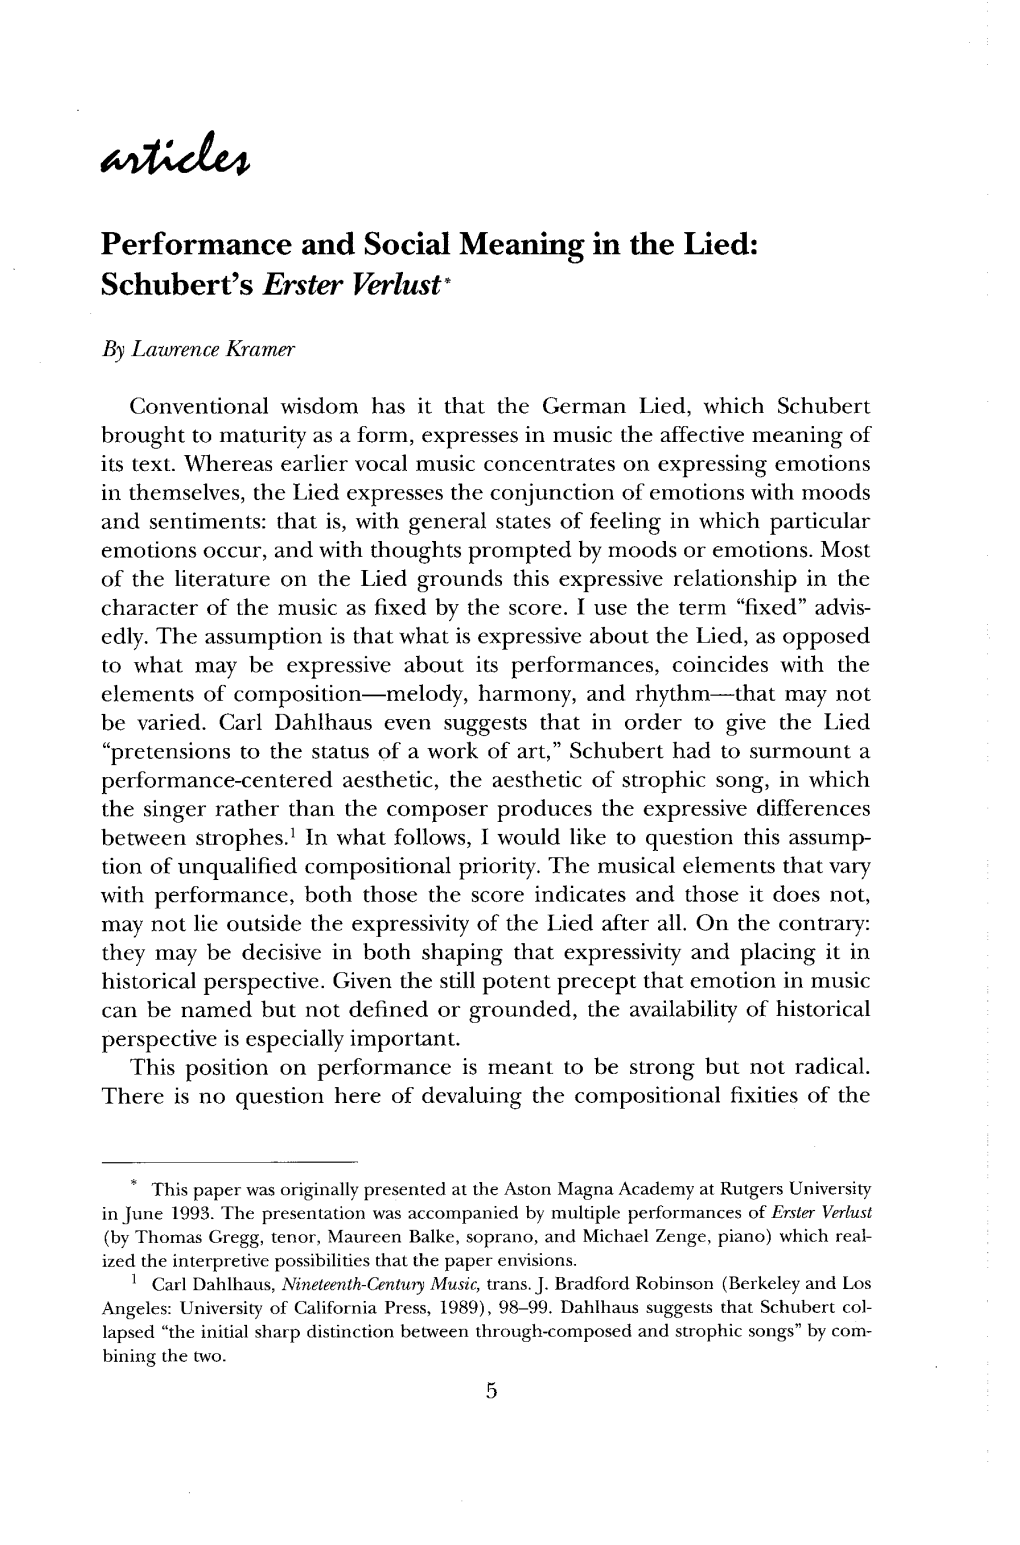 Performance and Social Meaning in the Lied: Schubert's Erster Verlust*